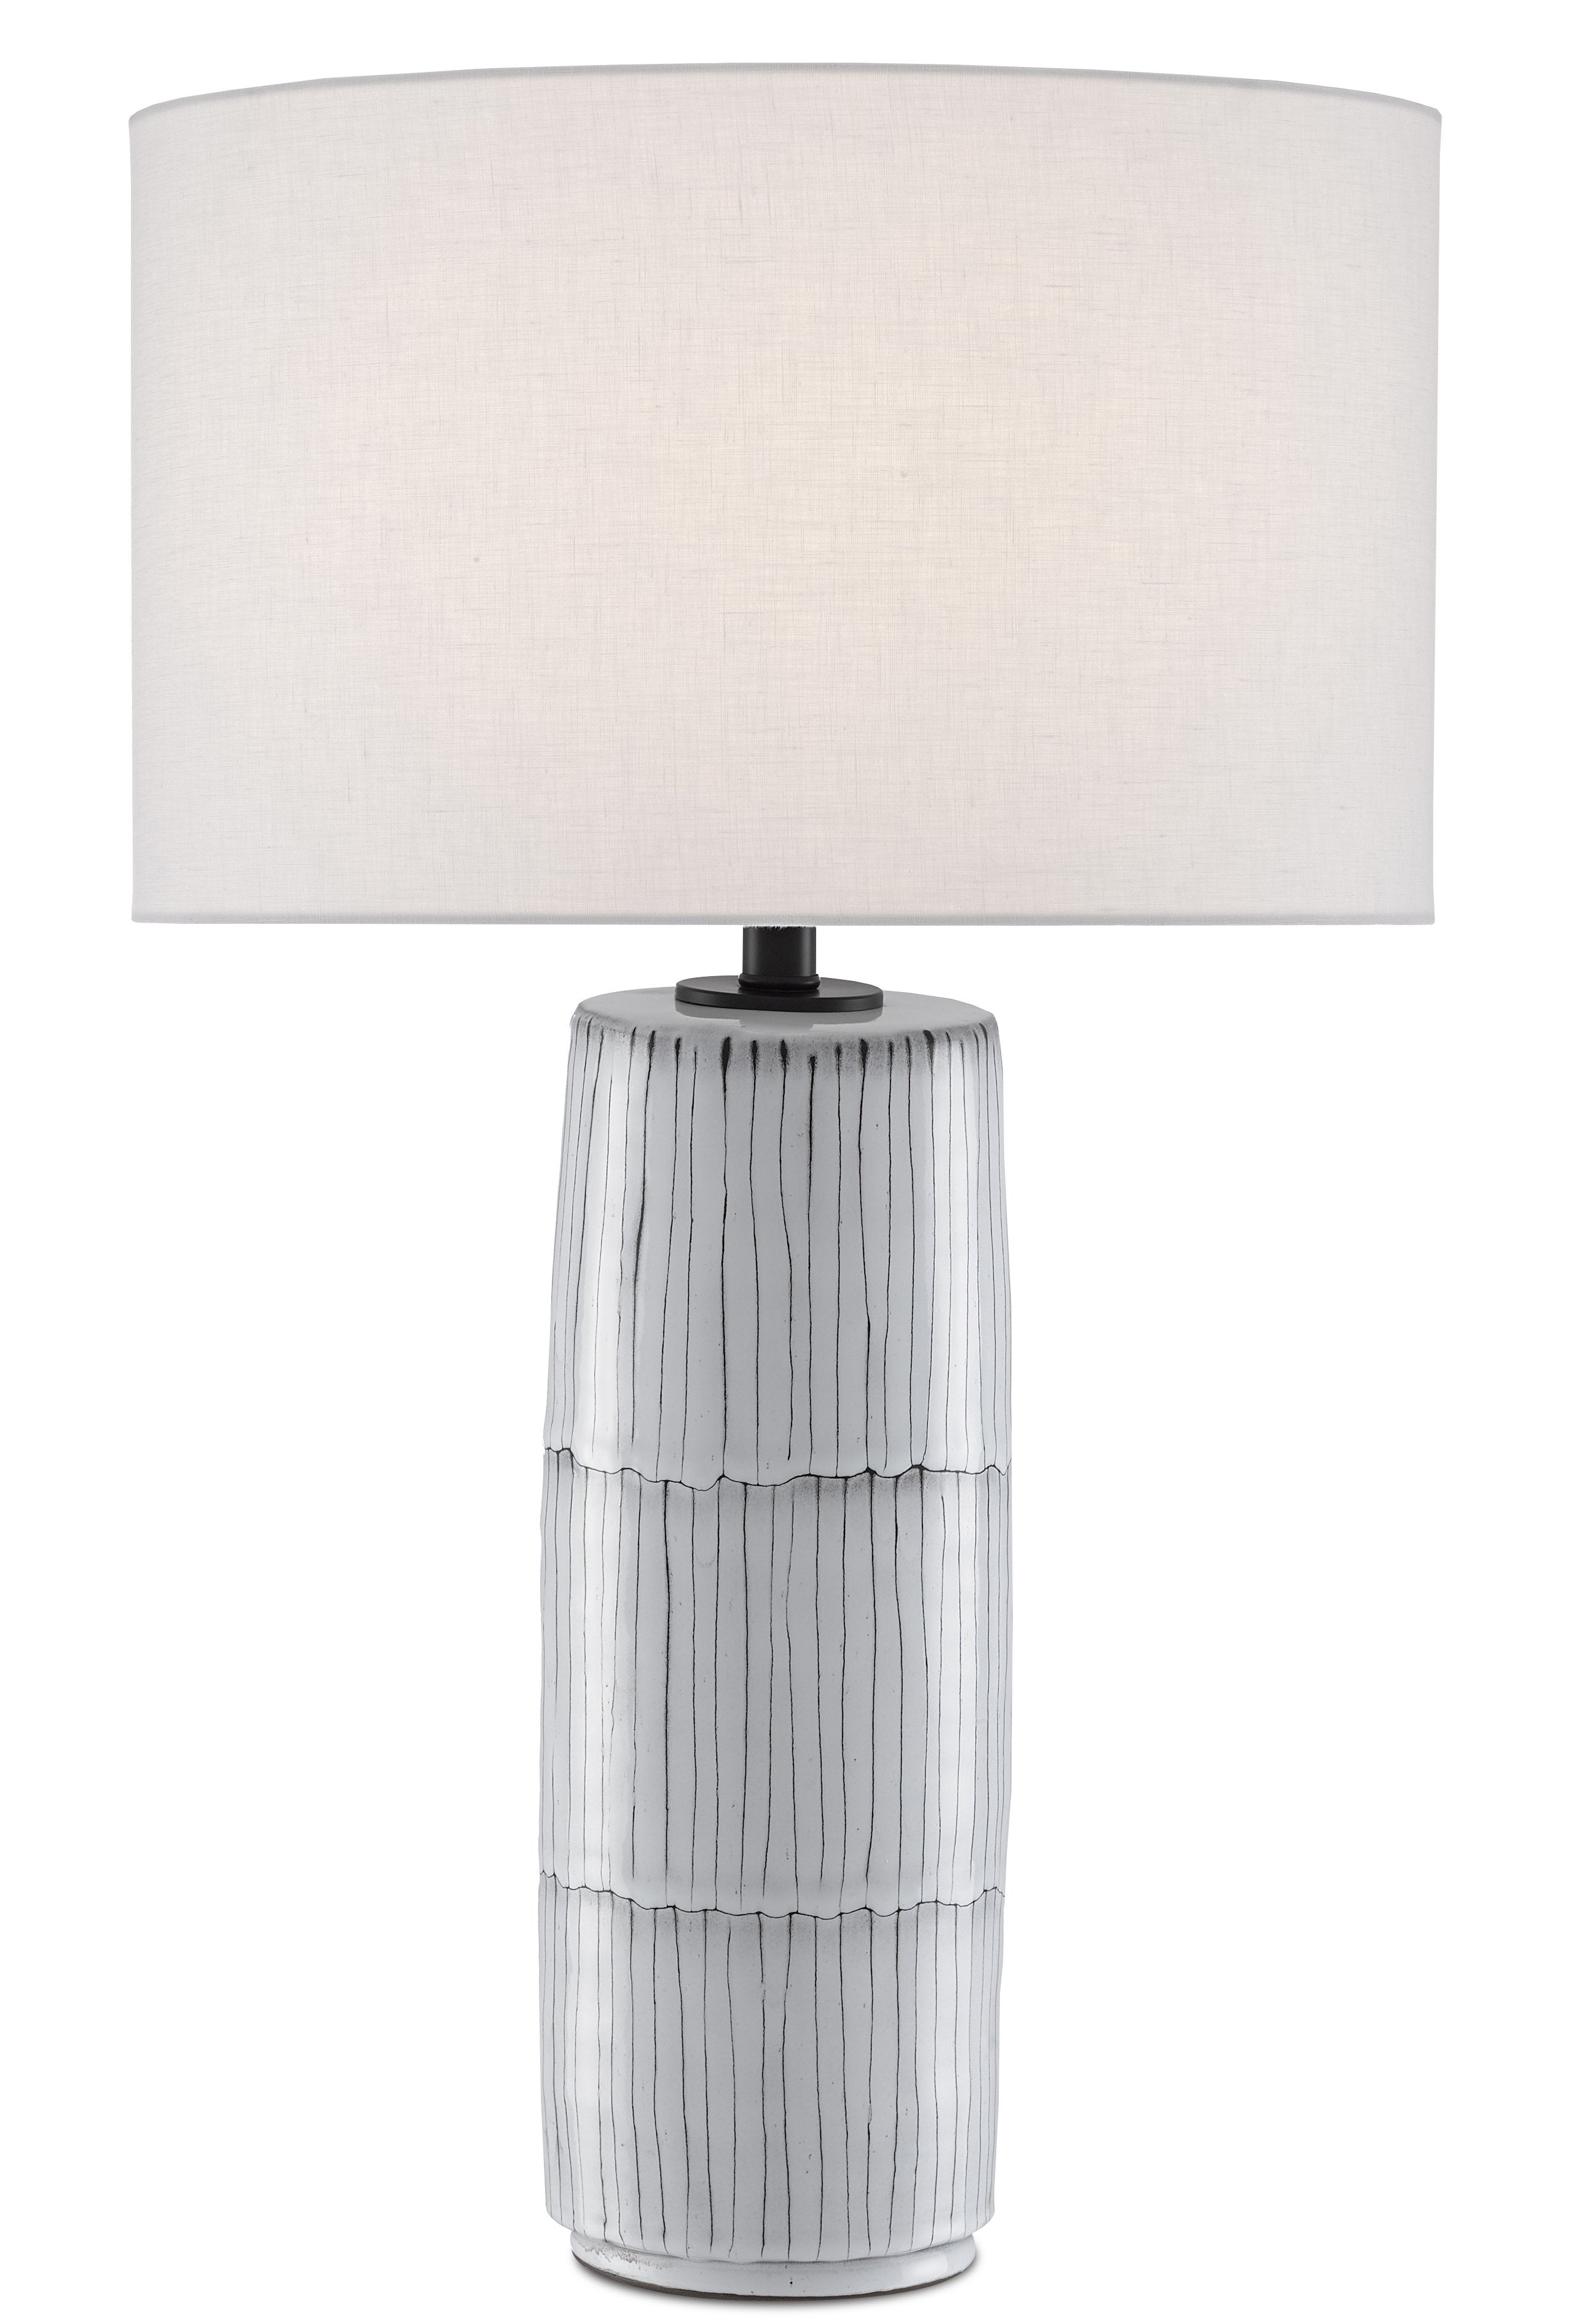 Chaarla Table Lamp by Currey and Company